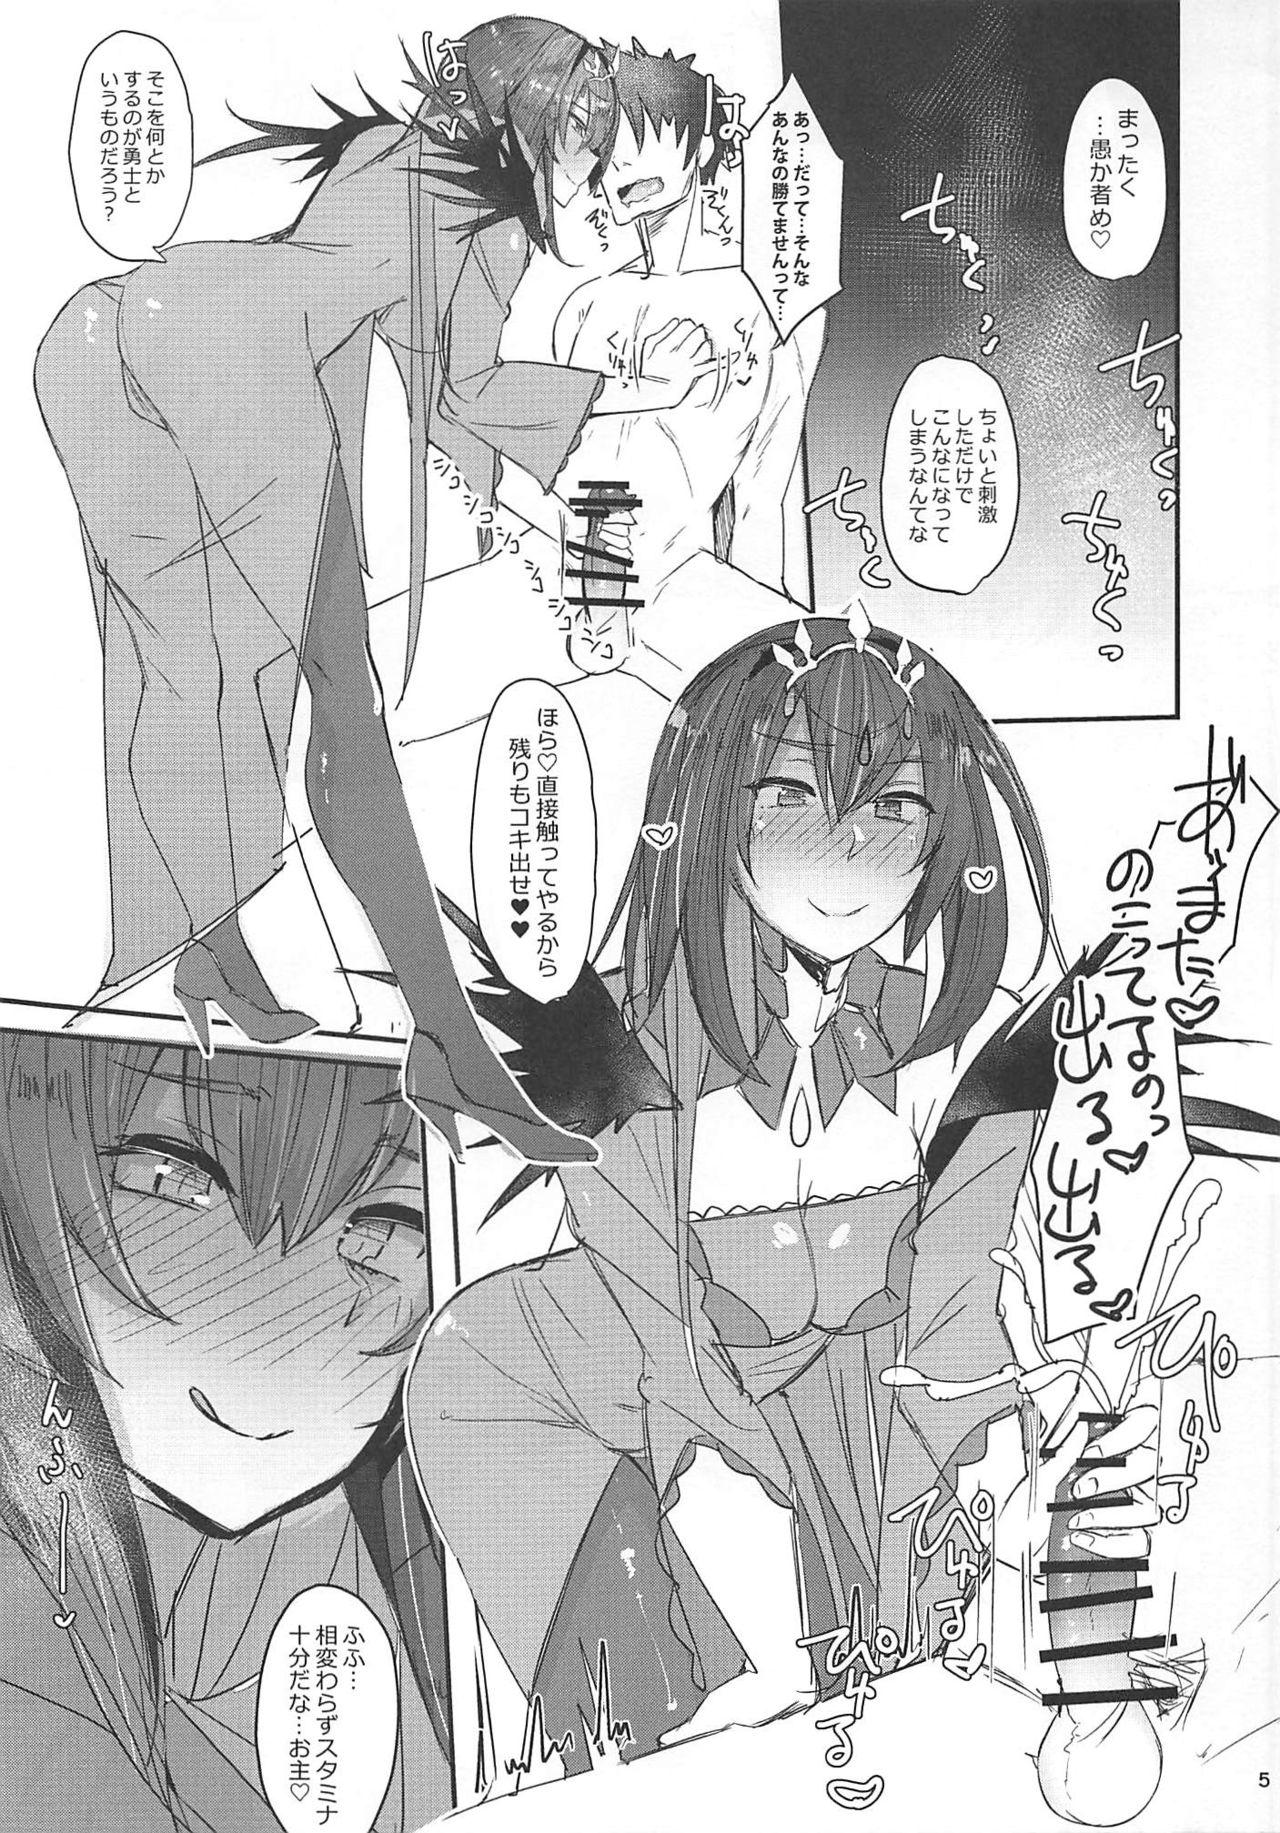 Beurette Funde Scathach-sama - Fate grand order Muscle - Page 5